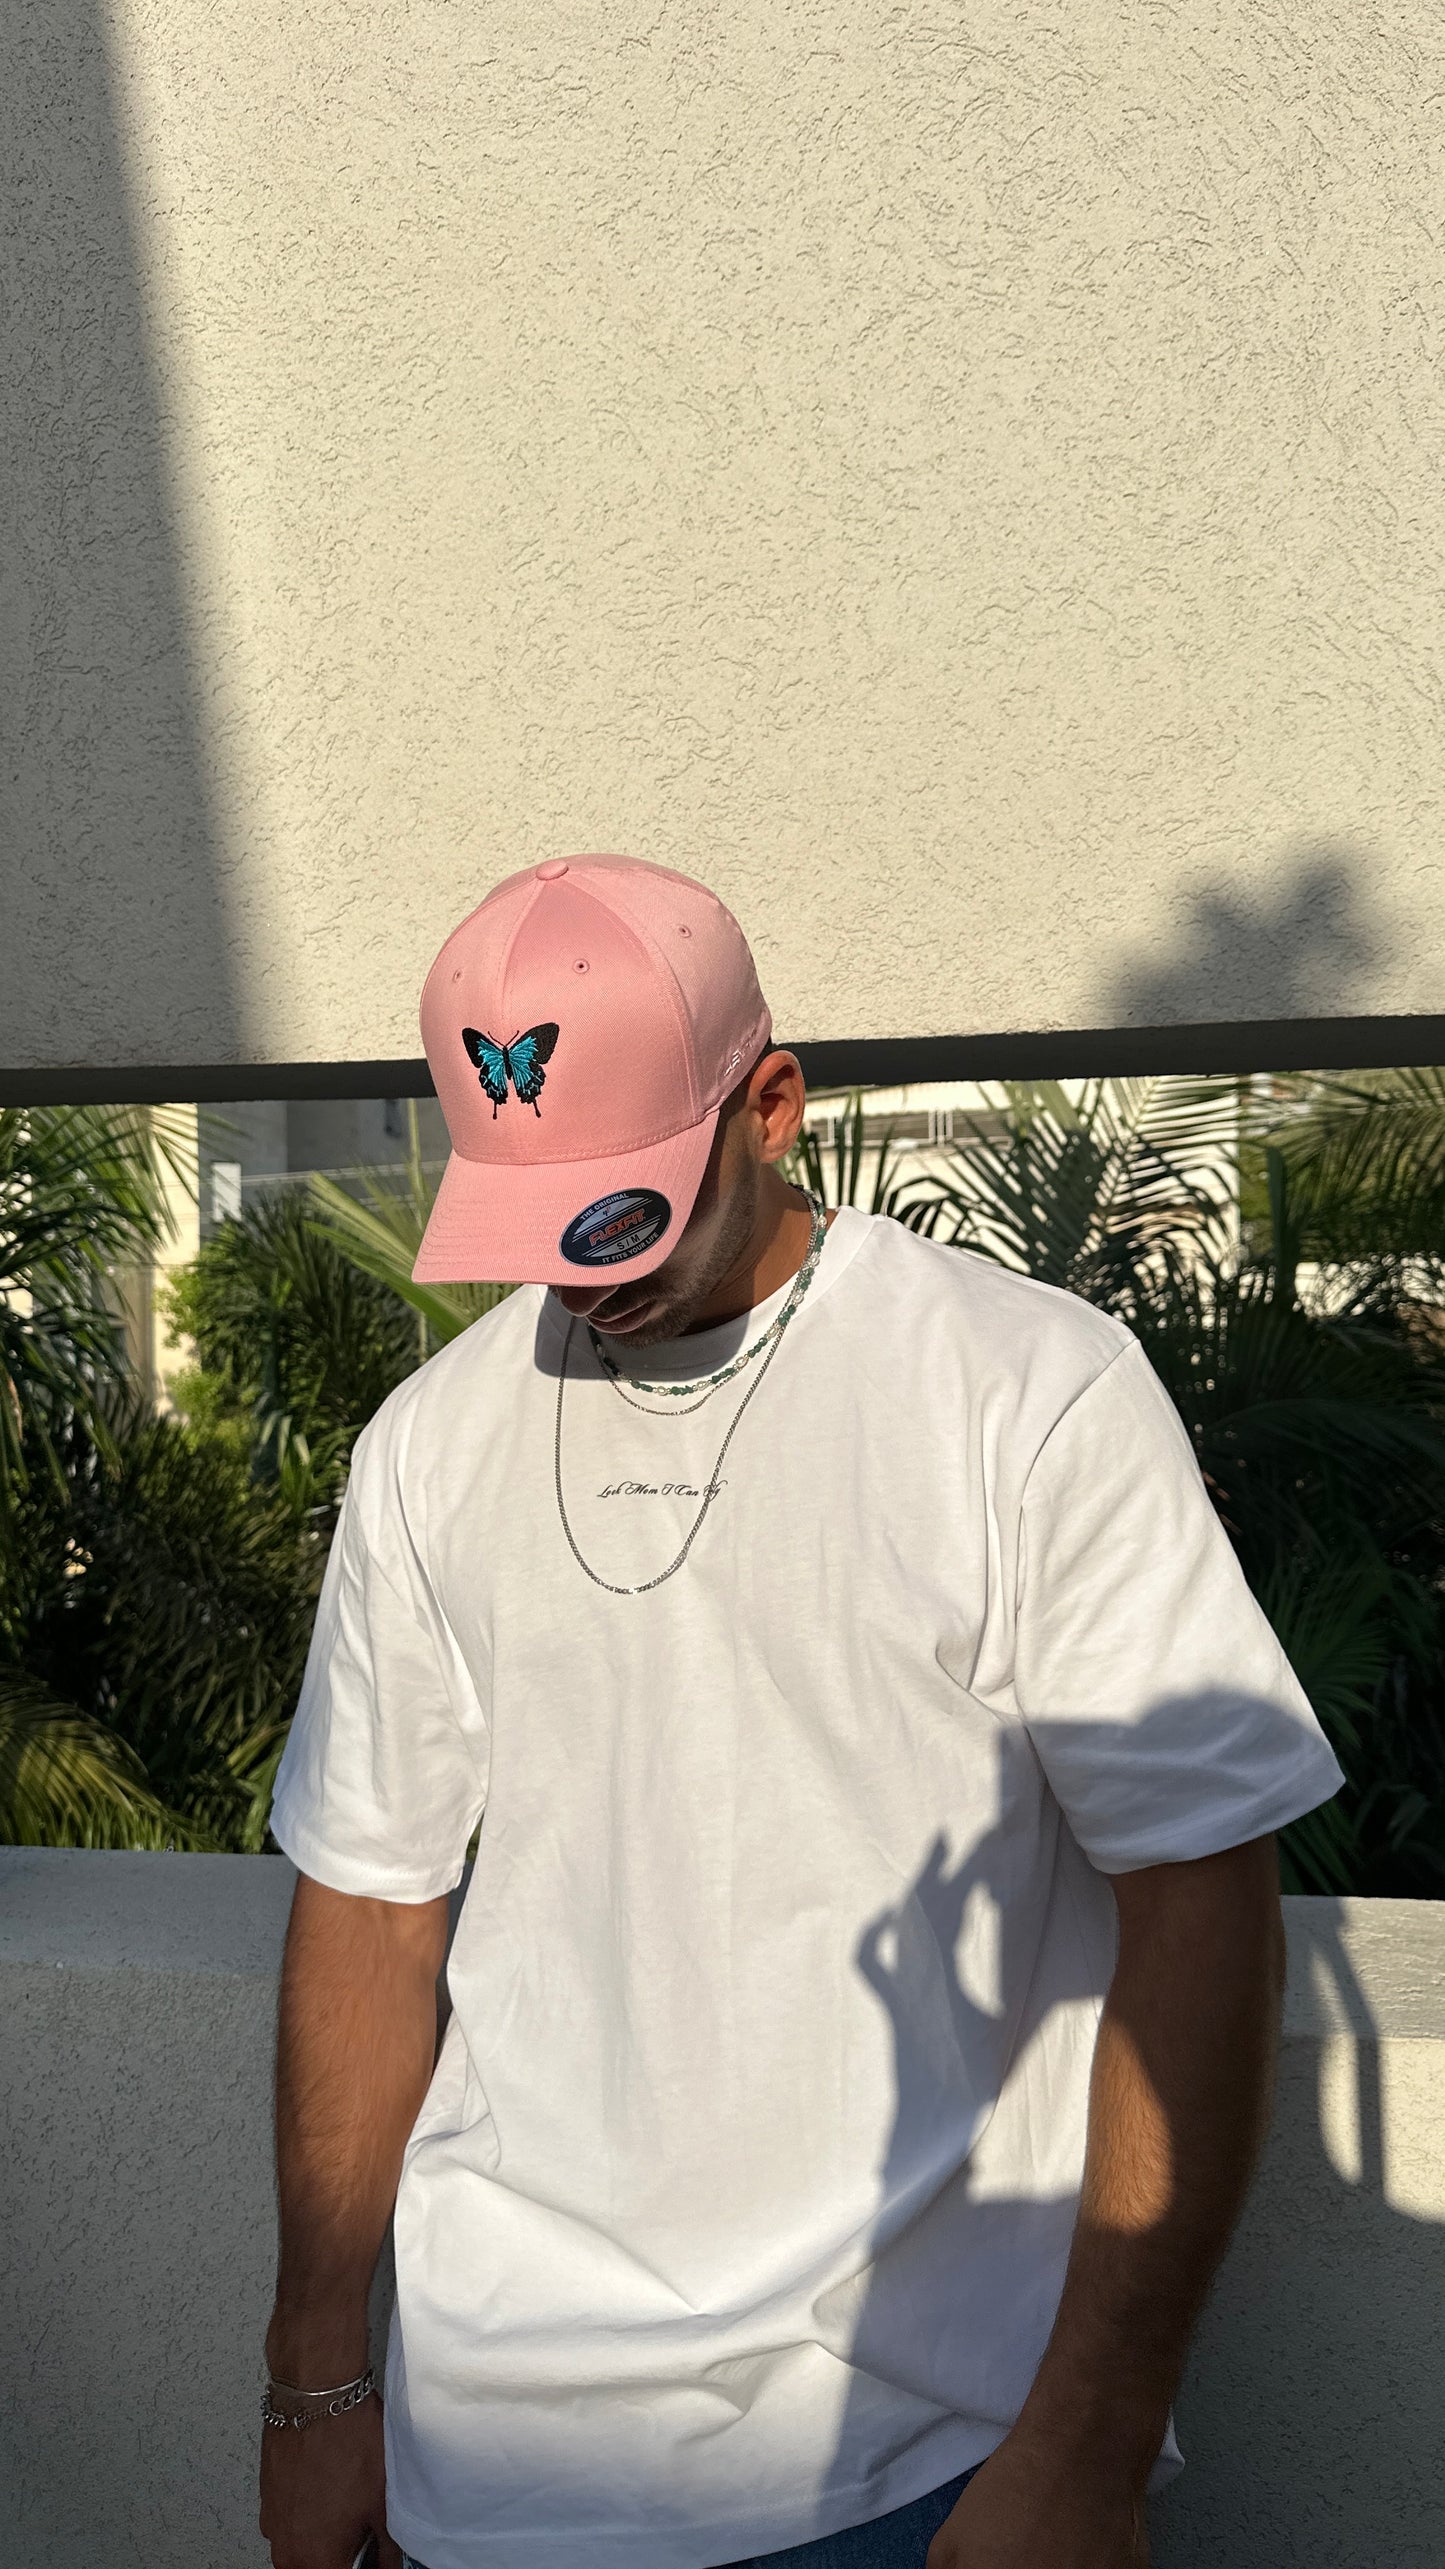 Butterfly Pink Cap Look mom